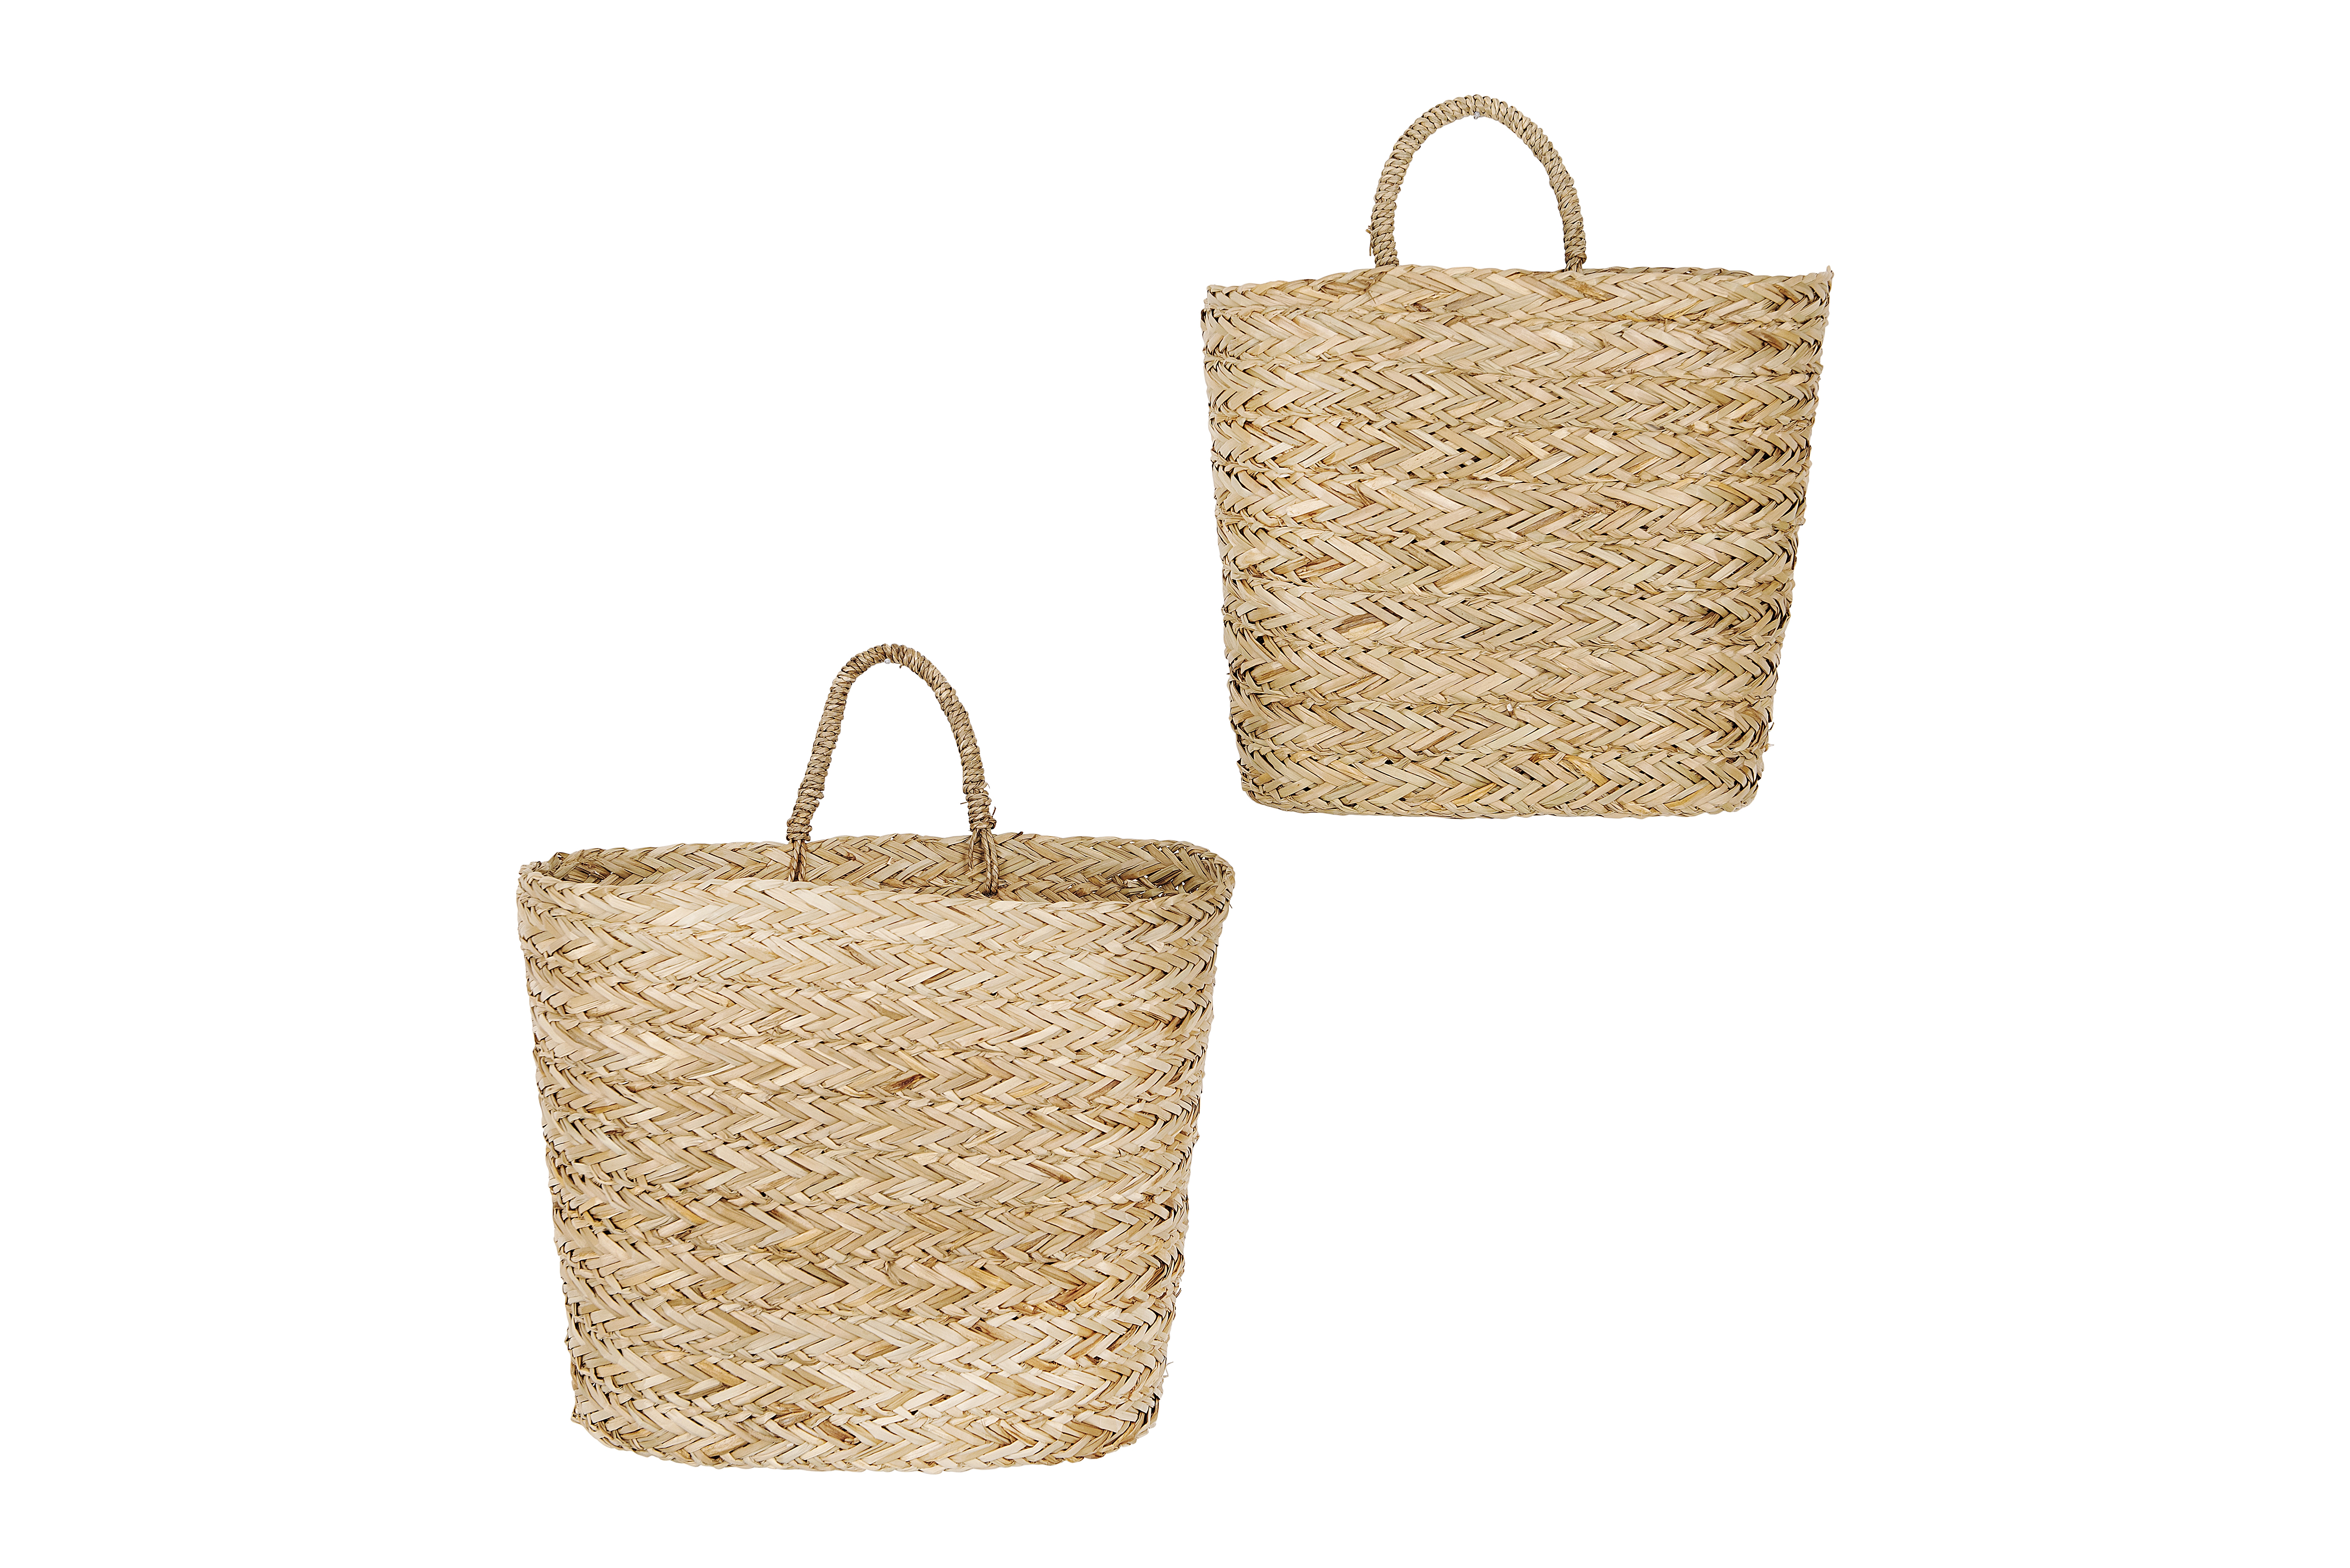 Handwoven Beige Seagrass Wall Baskets (Set of 2 Sizes) - Image 1